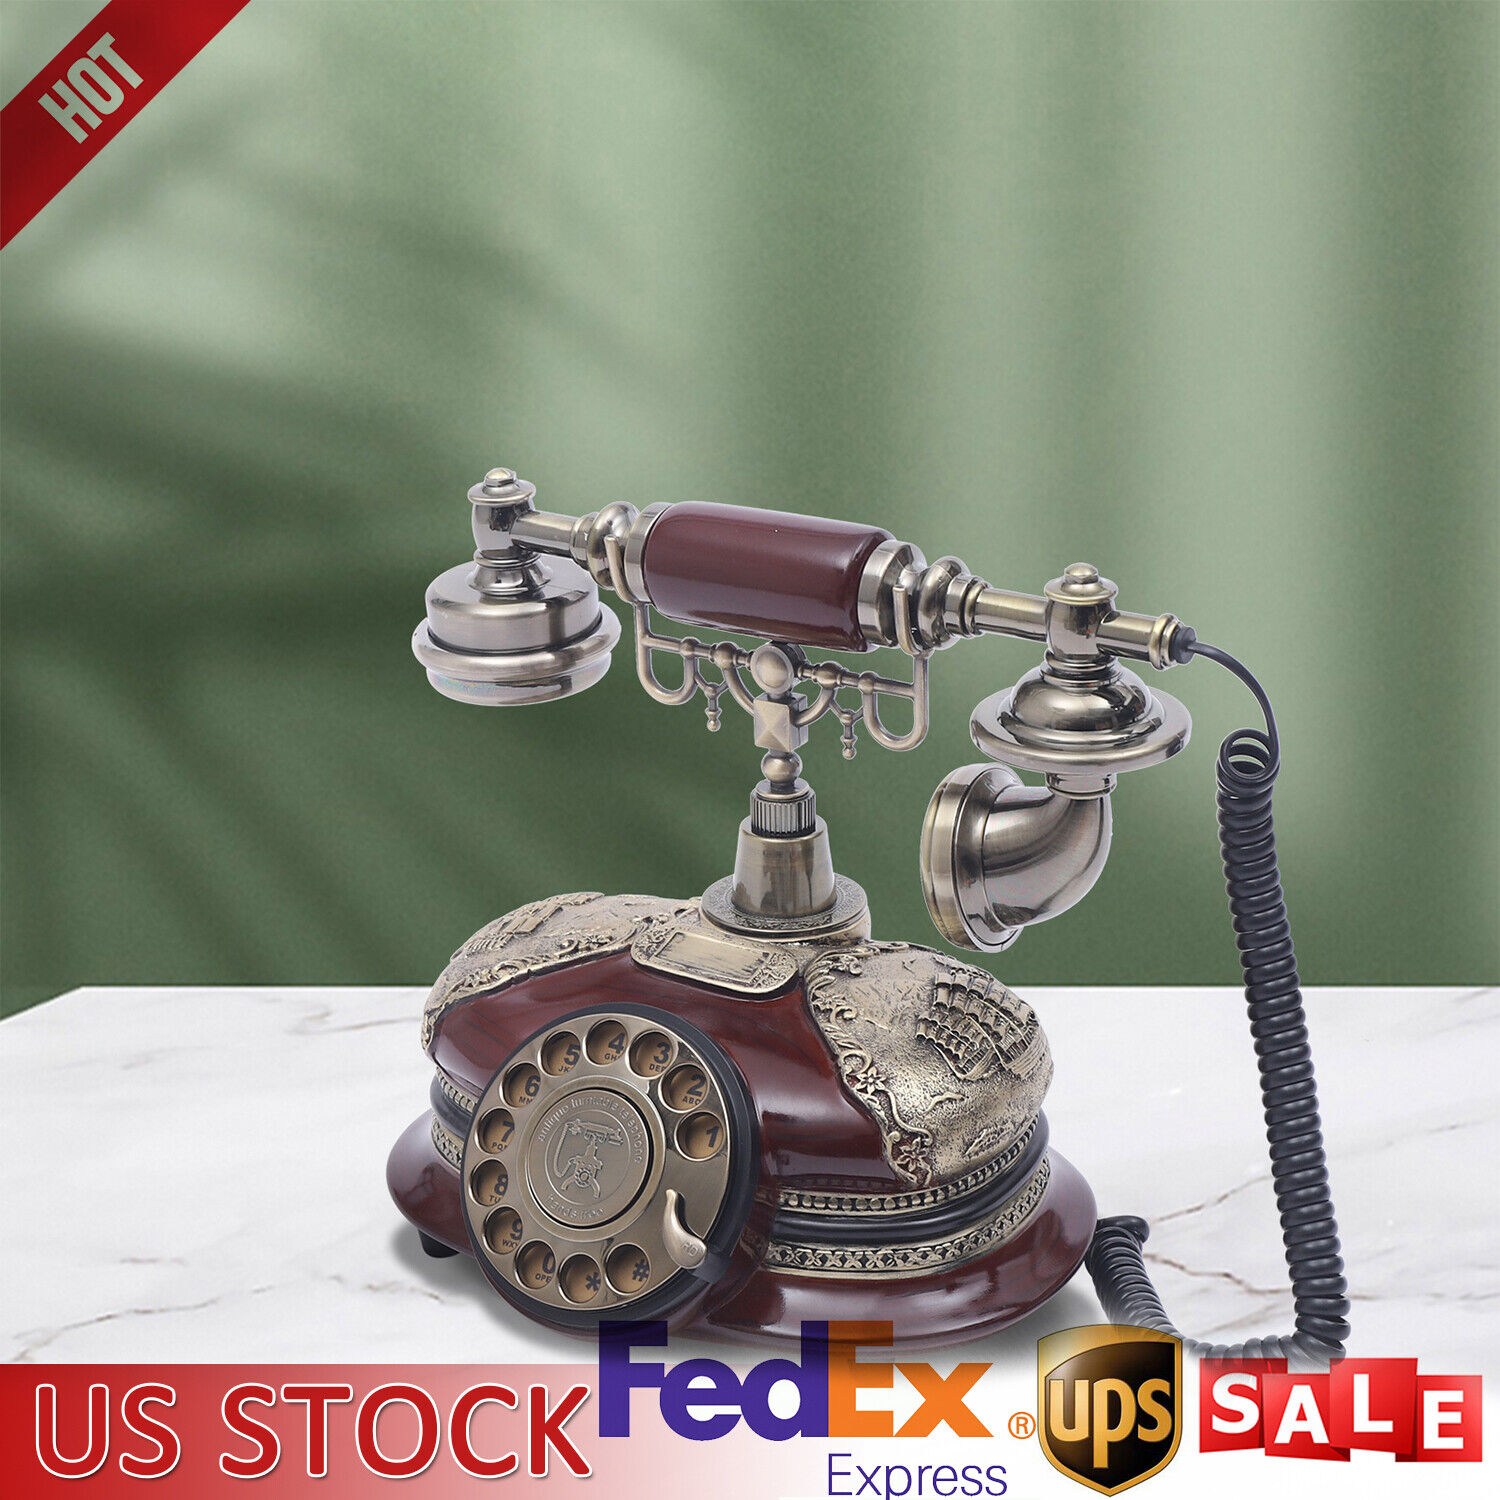 Antique Classic French Rotary Dial Working Telephone Vintage Home Decorations